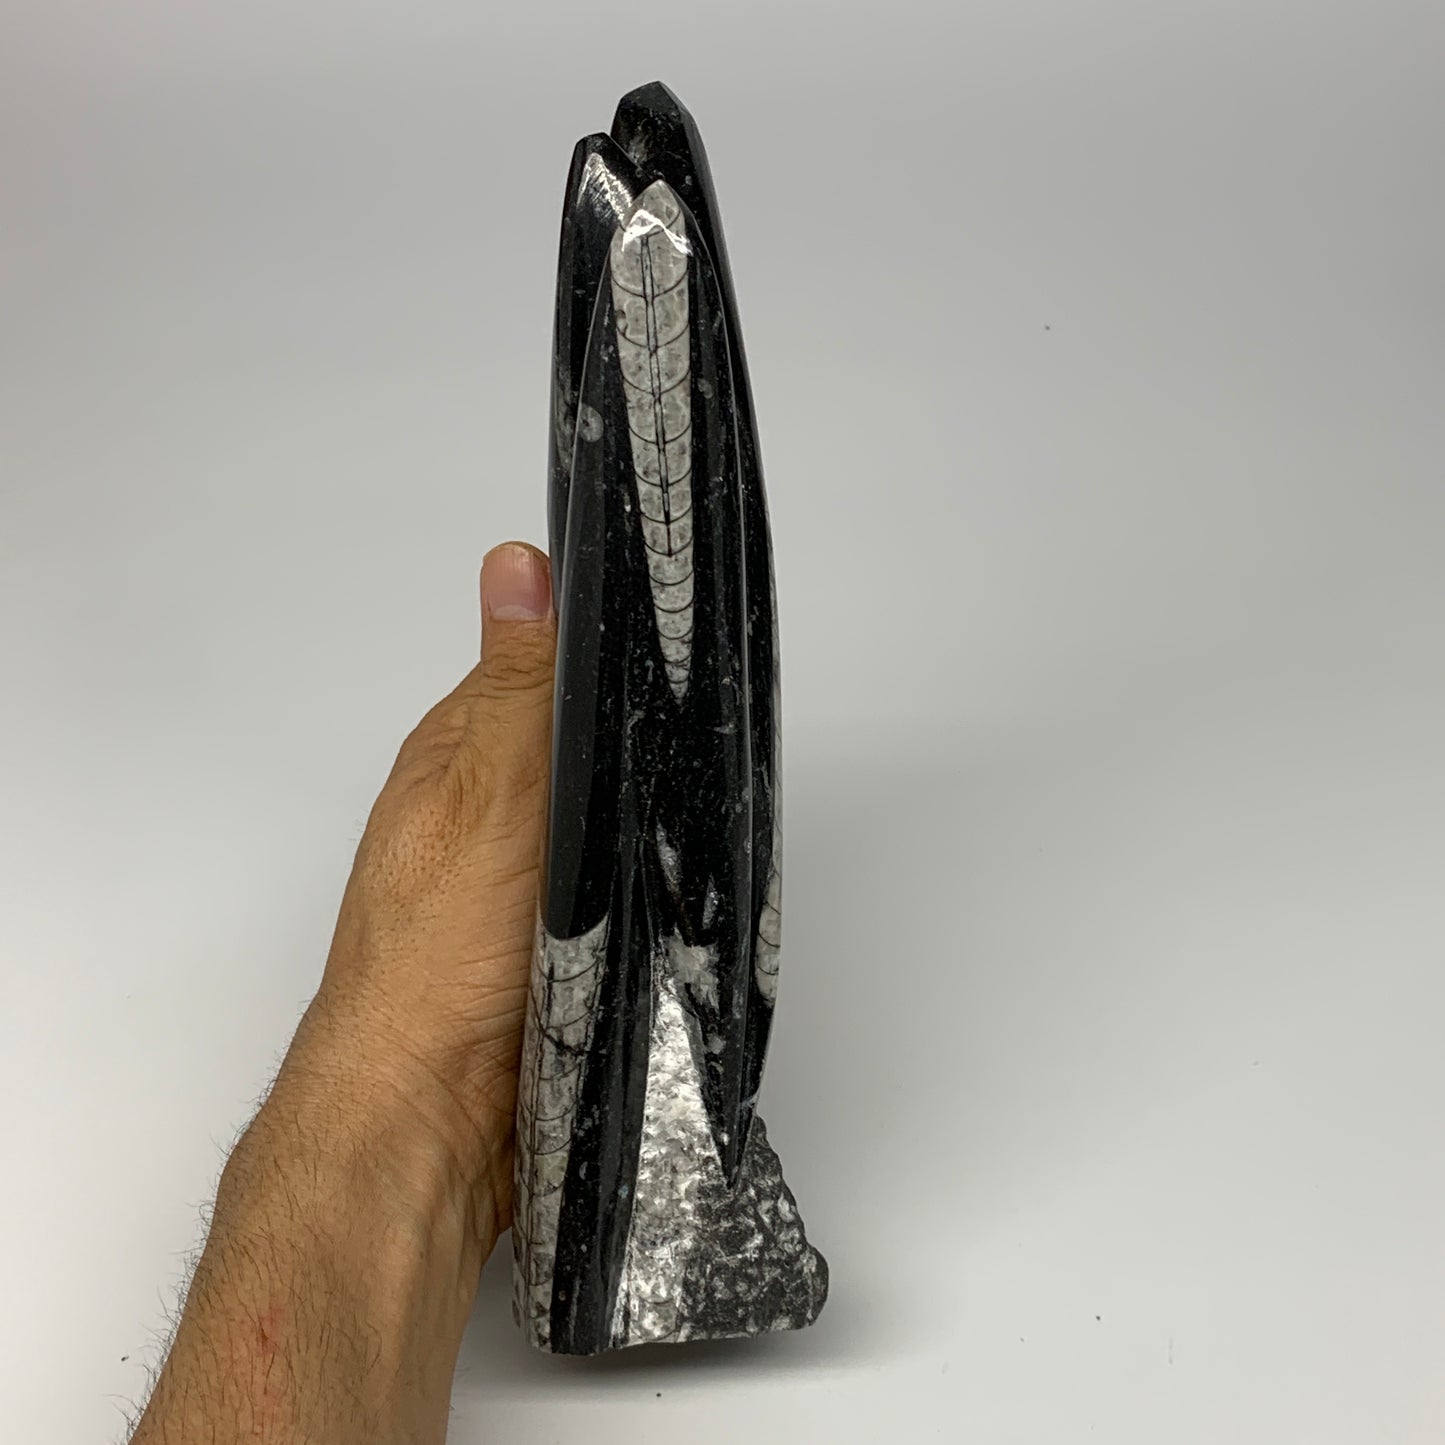 1210g, 6.9"x3.1"2.3" Black Fossils Orthoceras Sculpture Tower @Morocco, B23409